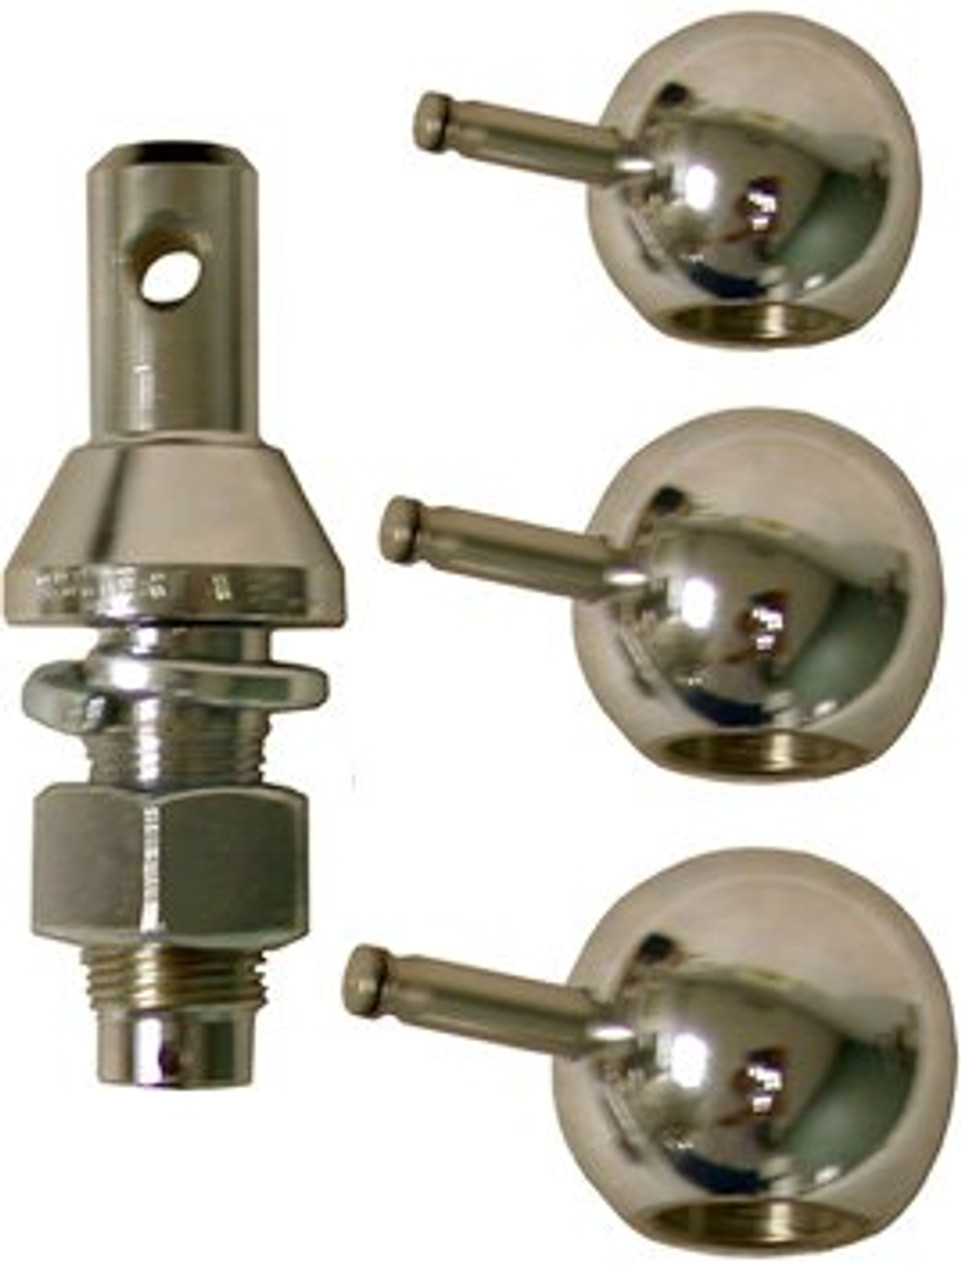 902 --- Convert-A-Ball, 1" Stainless Steel Regular Shank plus 1-7/8", 2" and 2-5/16" Stainless Steel Hitch Balls